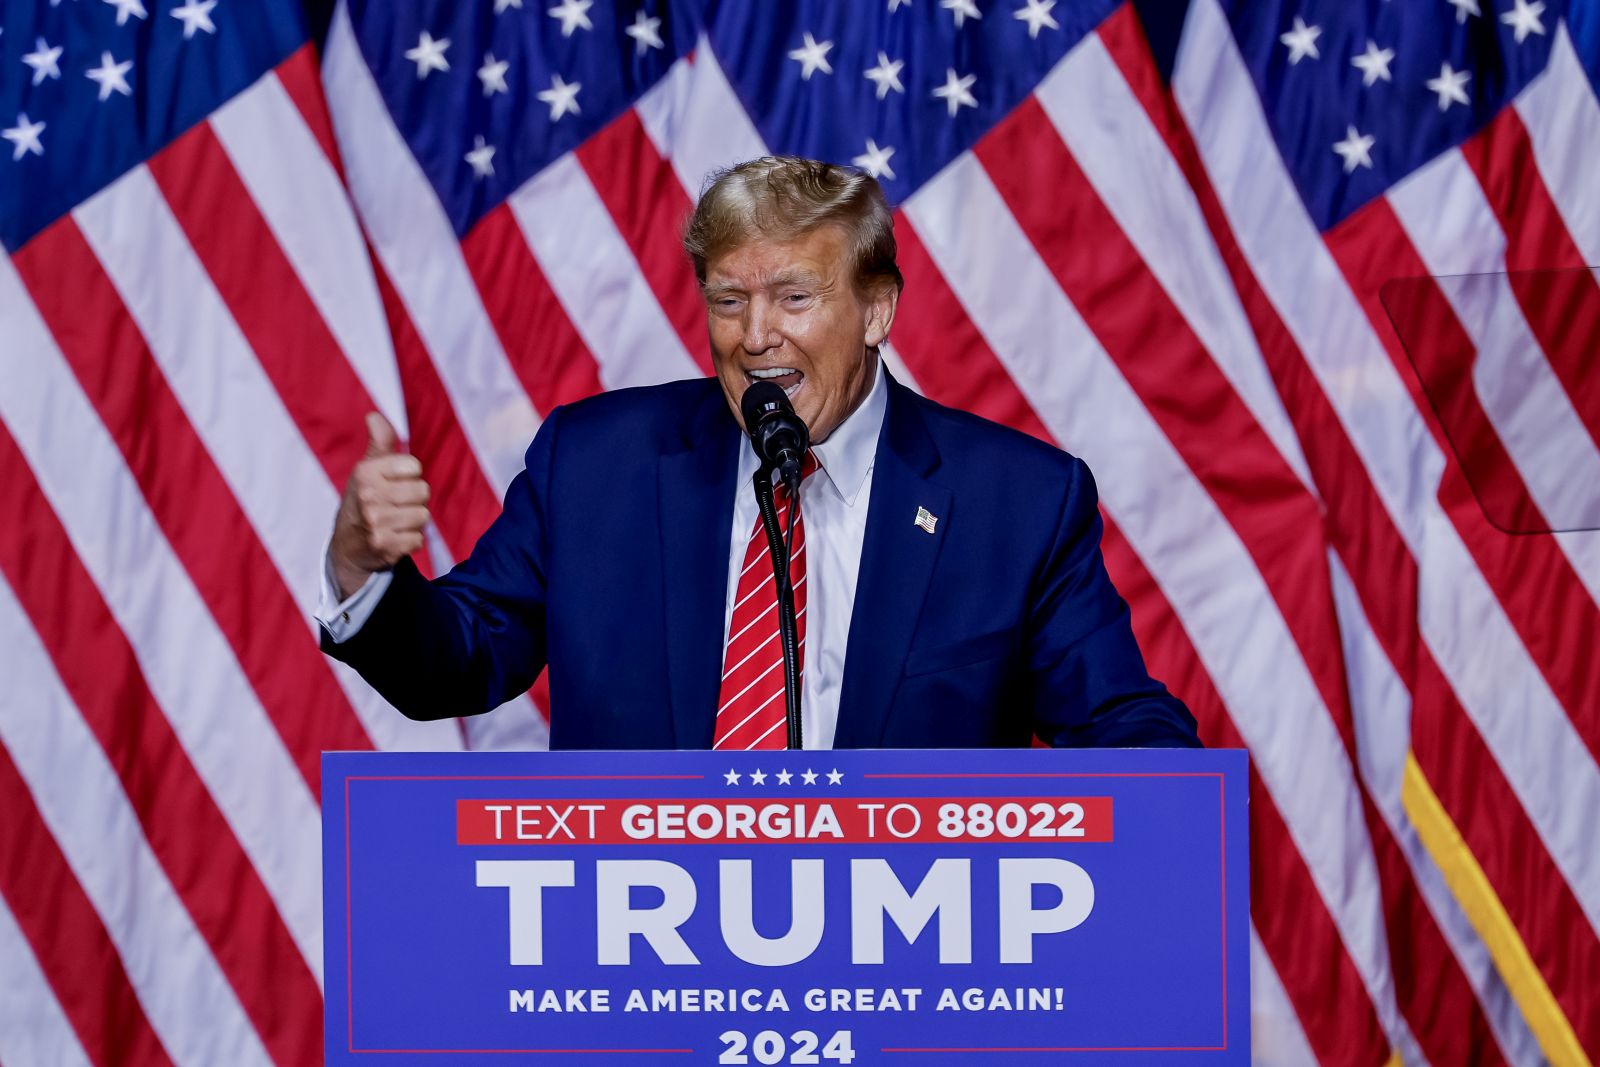 epa11210246 Former US President and Republican presidential candidate Donald Trump speaks during a 'Get Out The Vote Rally' campaign event at the Forum River Center in Rome, Georgia, USA, 09 March 2024. The Georgia presidential primary election is 12 March 2024.  EPA/ERIK S. LESSER